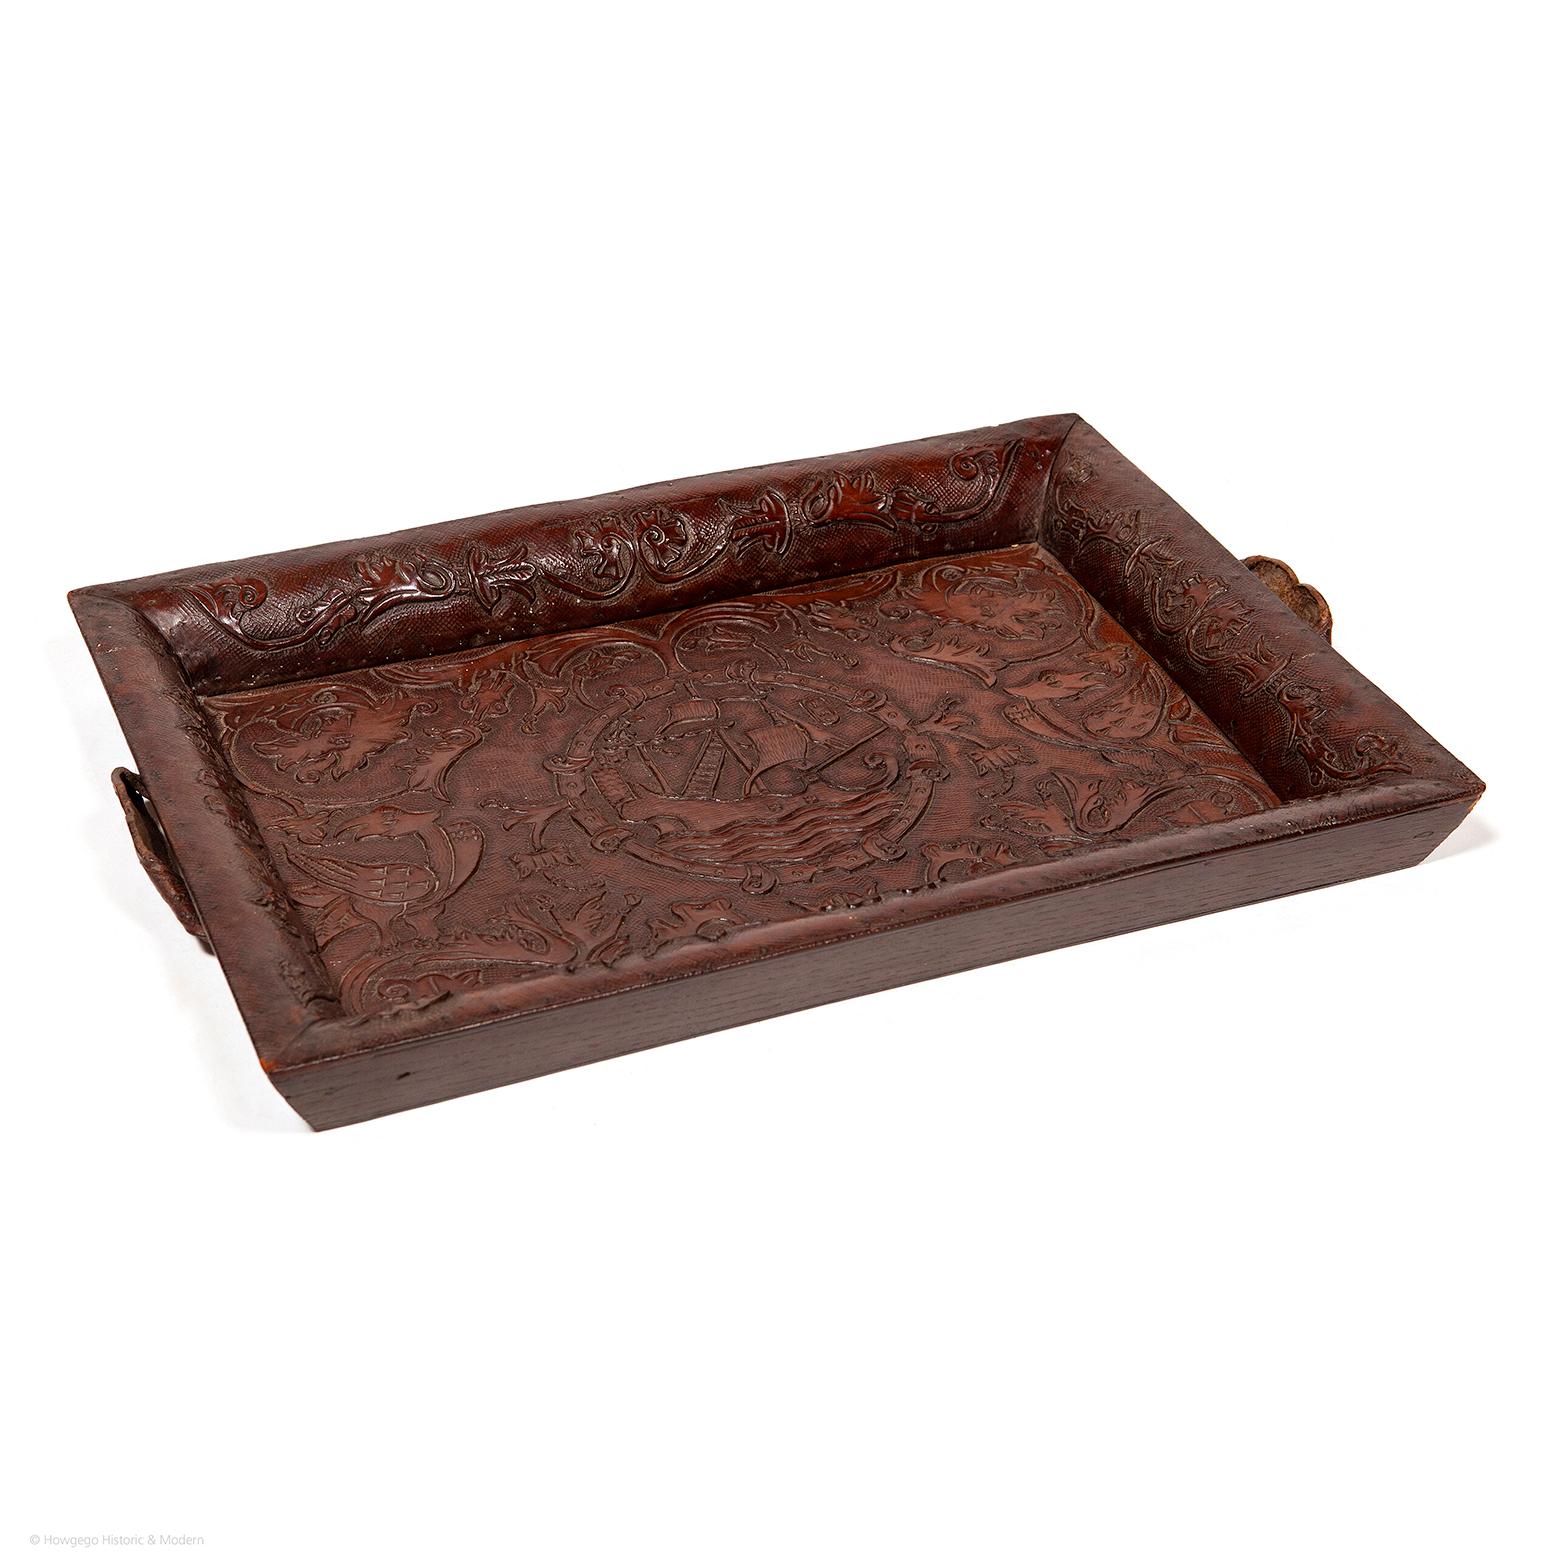 Baroque Revival Tray Leather Embossed Nautical Design Galleon Tulip Mythical Bird Brown Baroque For Sale